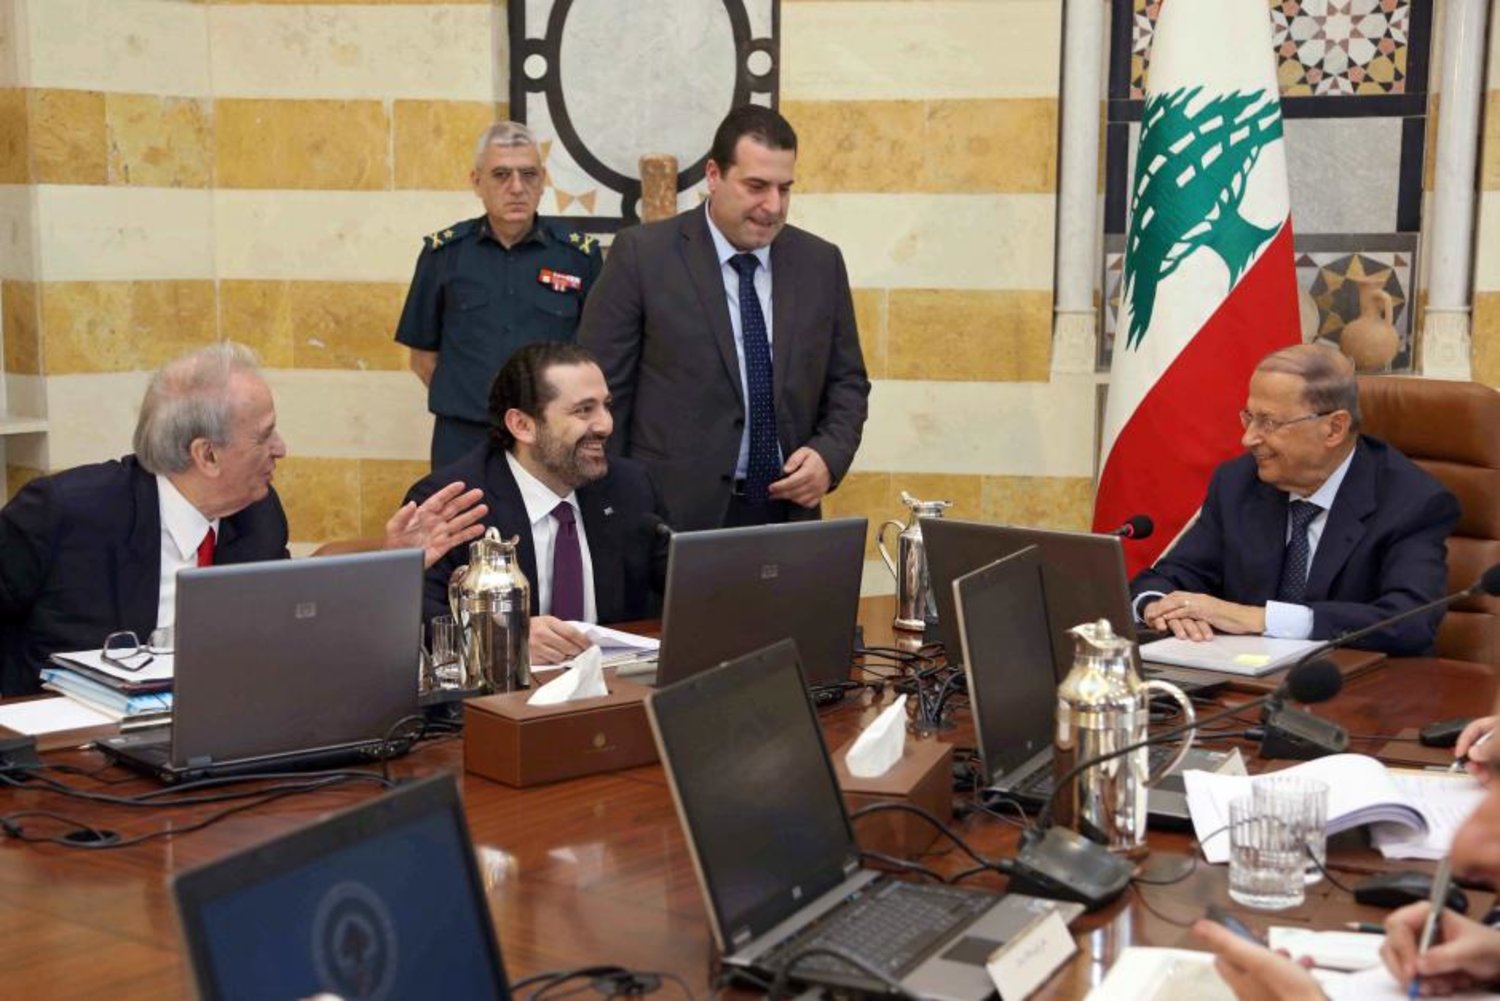 Lebanese President Michel Aoun (R) chats with Prime Minister Saad Hariri (C) as Education Minister Marwan Hamadeh (L) looks on during a cabinet meeting at the presidential palace in Baabda, Lebanon June 14, 2017. Dalati Nohra/Handout via REUTERS